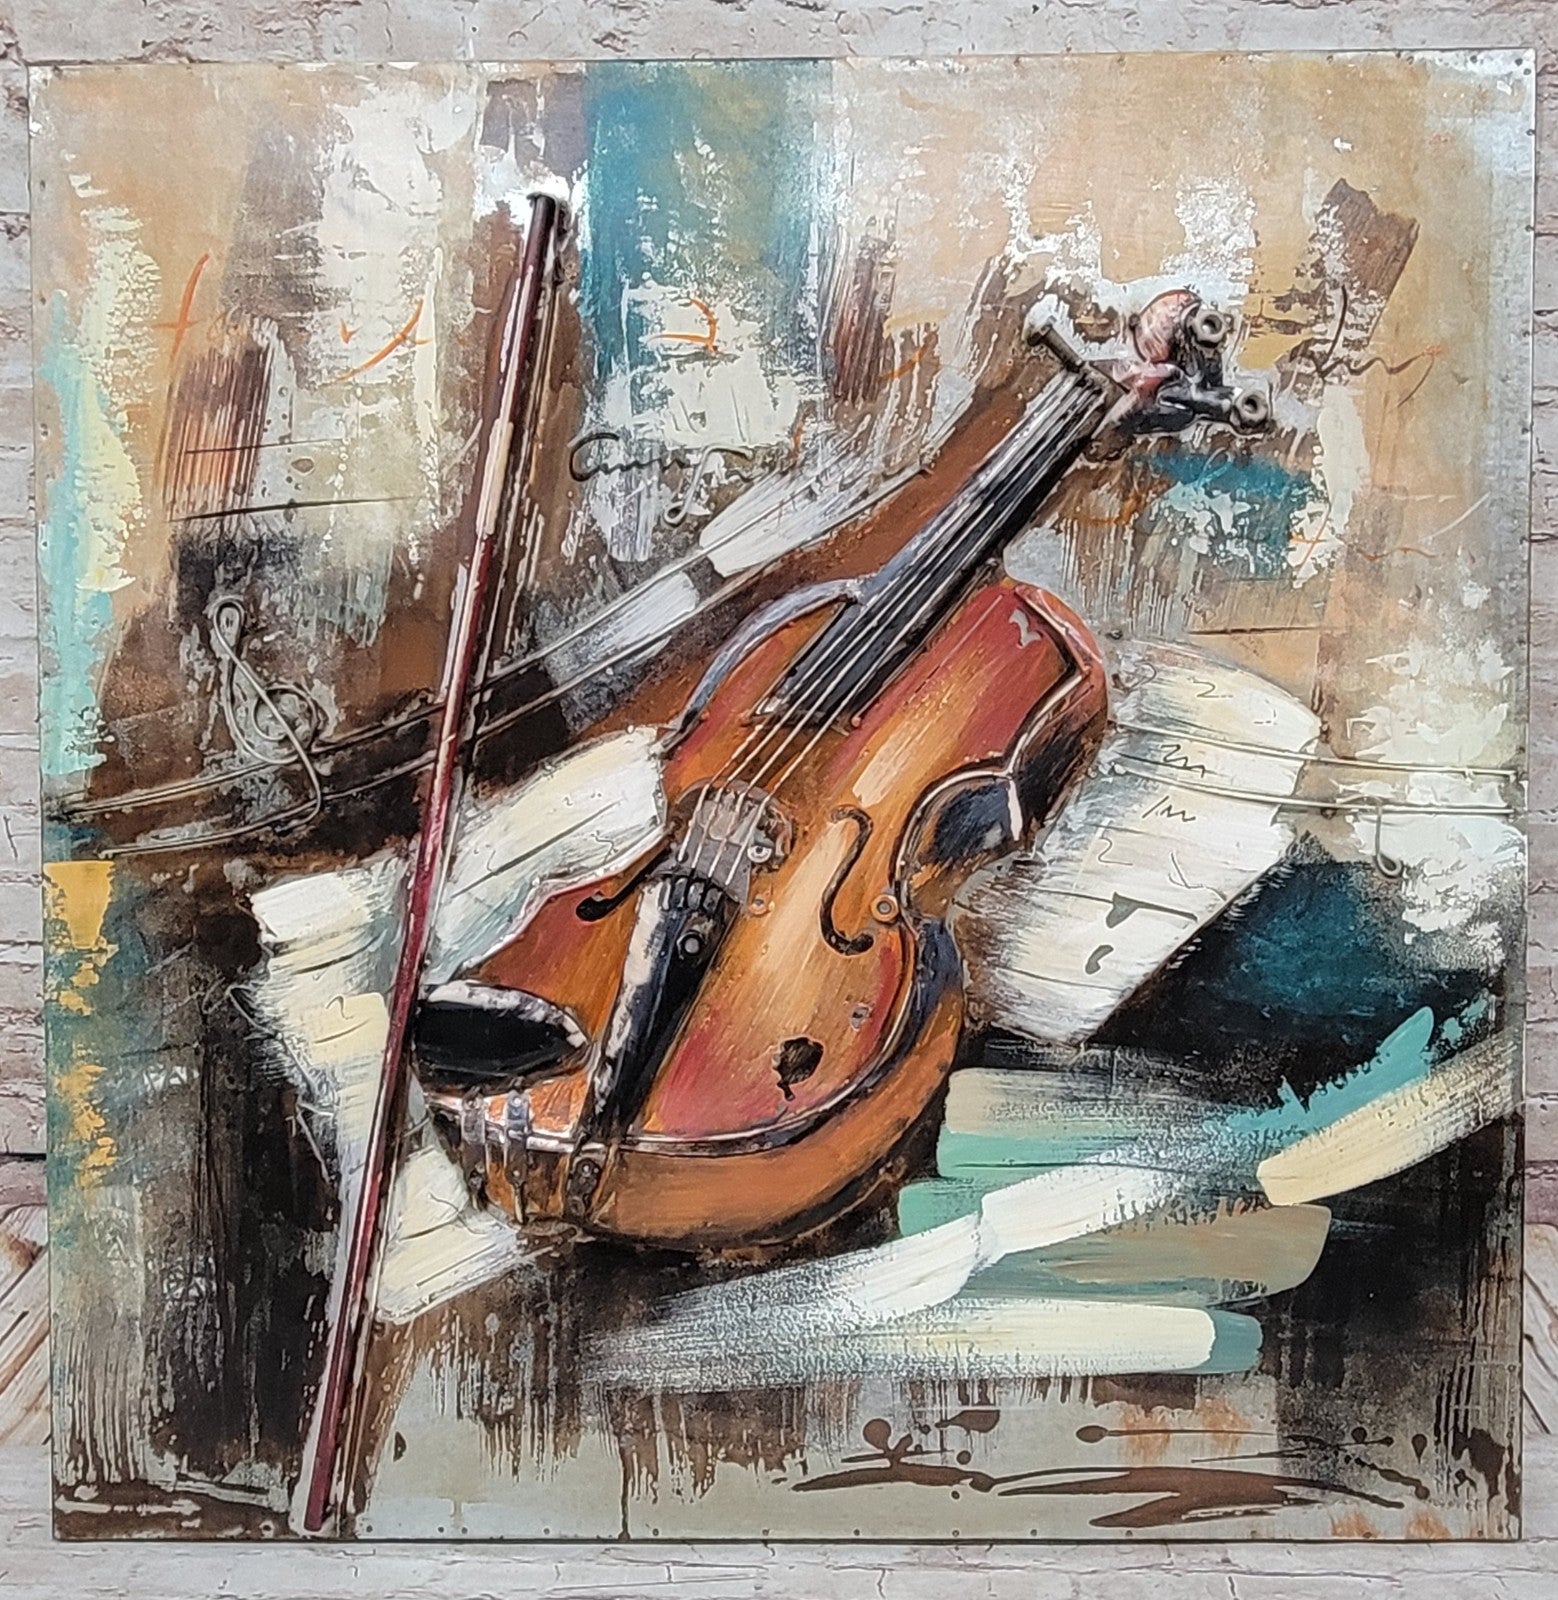 3D Wall Art Abstract Painting on canvas Violin Music Wall Sculpture Hand Made